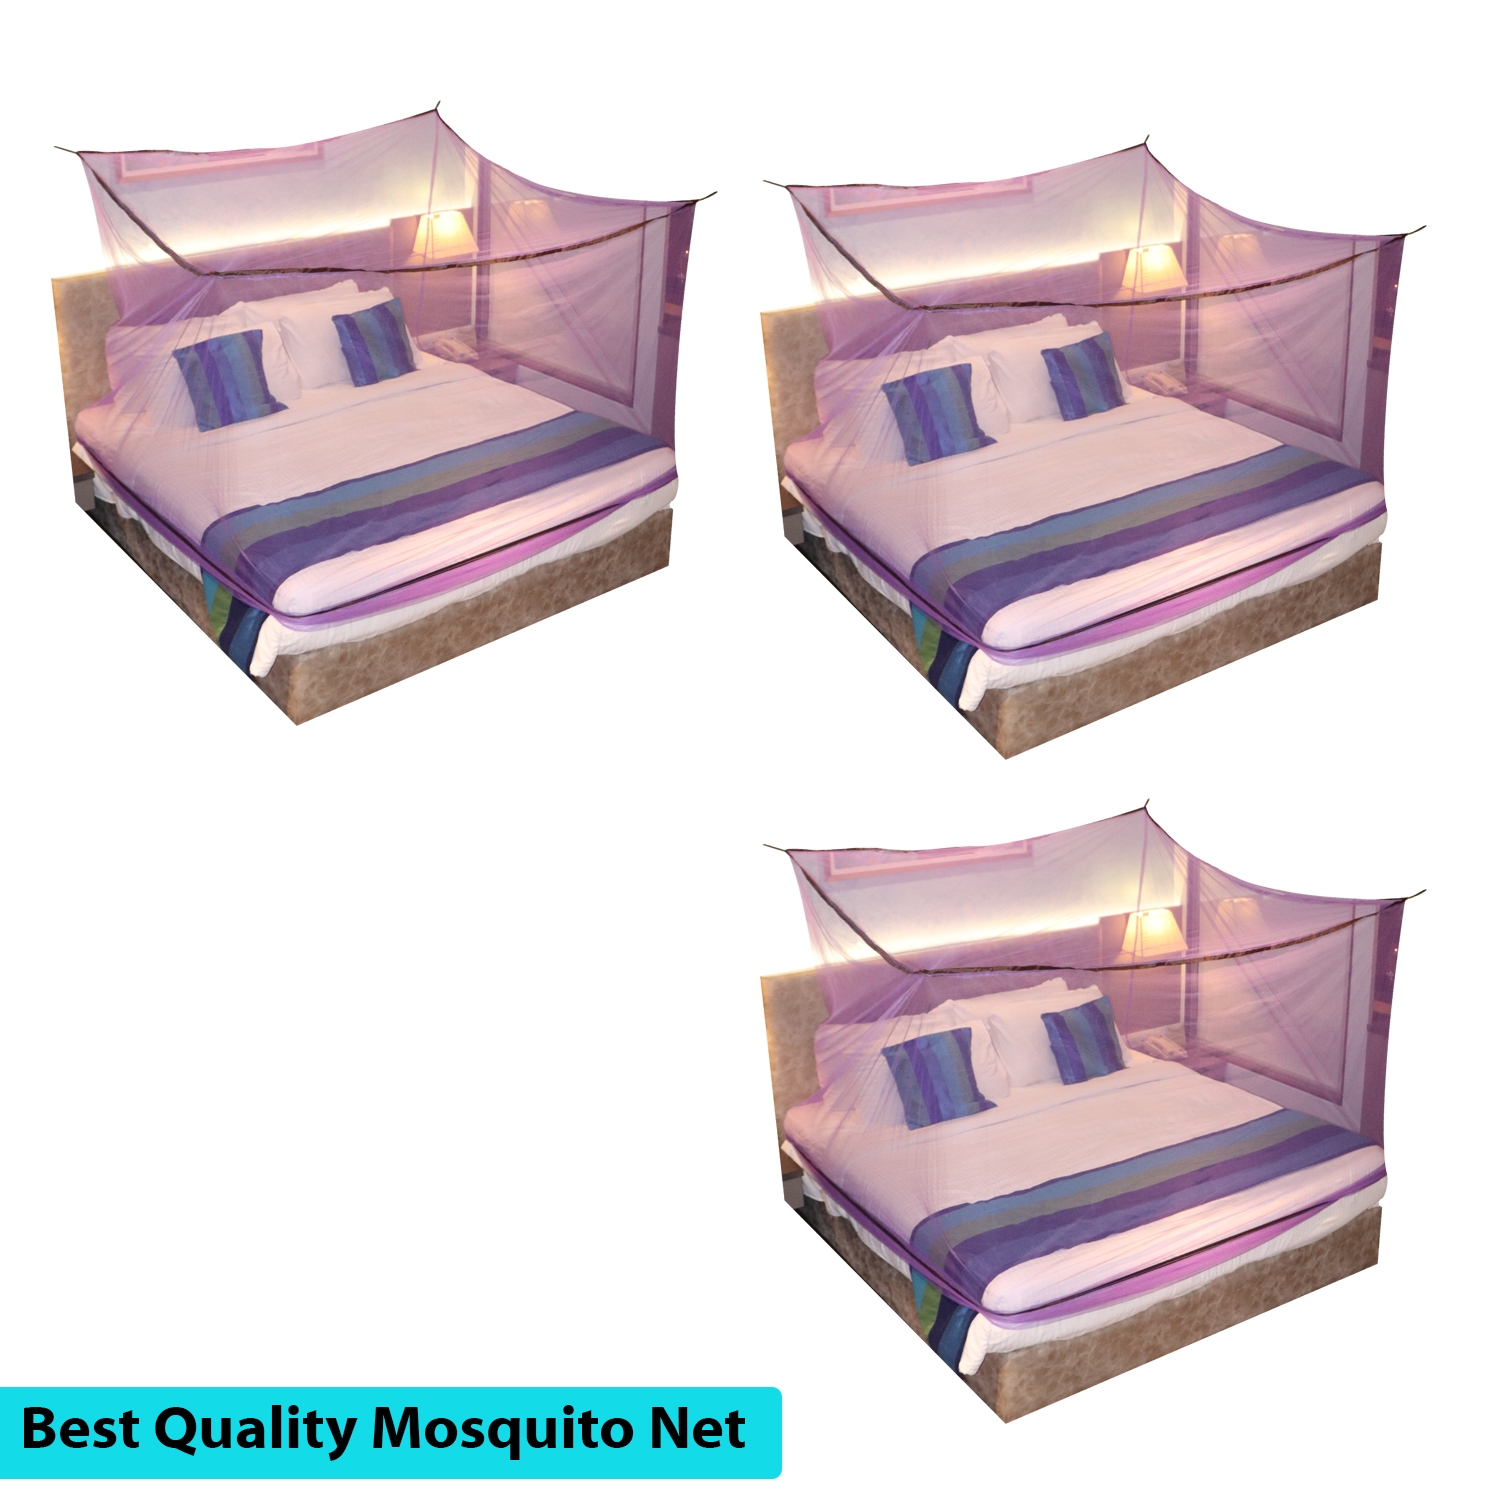 Paola Jewels | Mosquito Net for Double Bed, King-Size, Square Hanging Foldable Polyester Net Purple And Brown Pack of 3